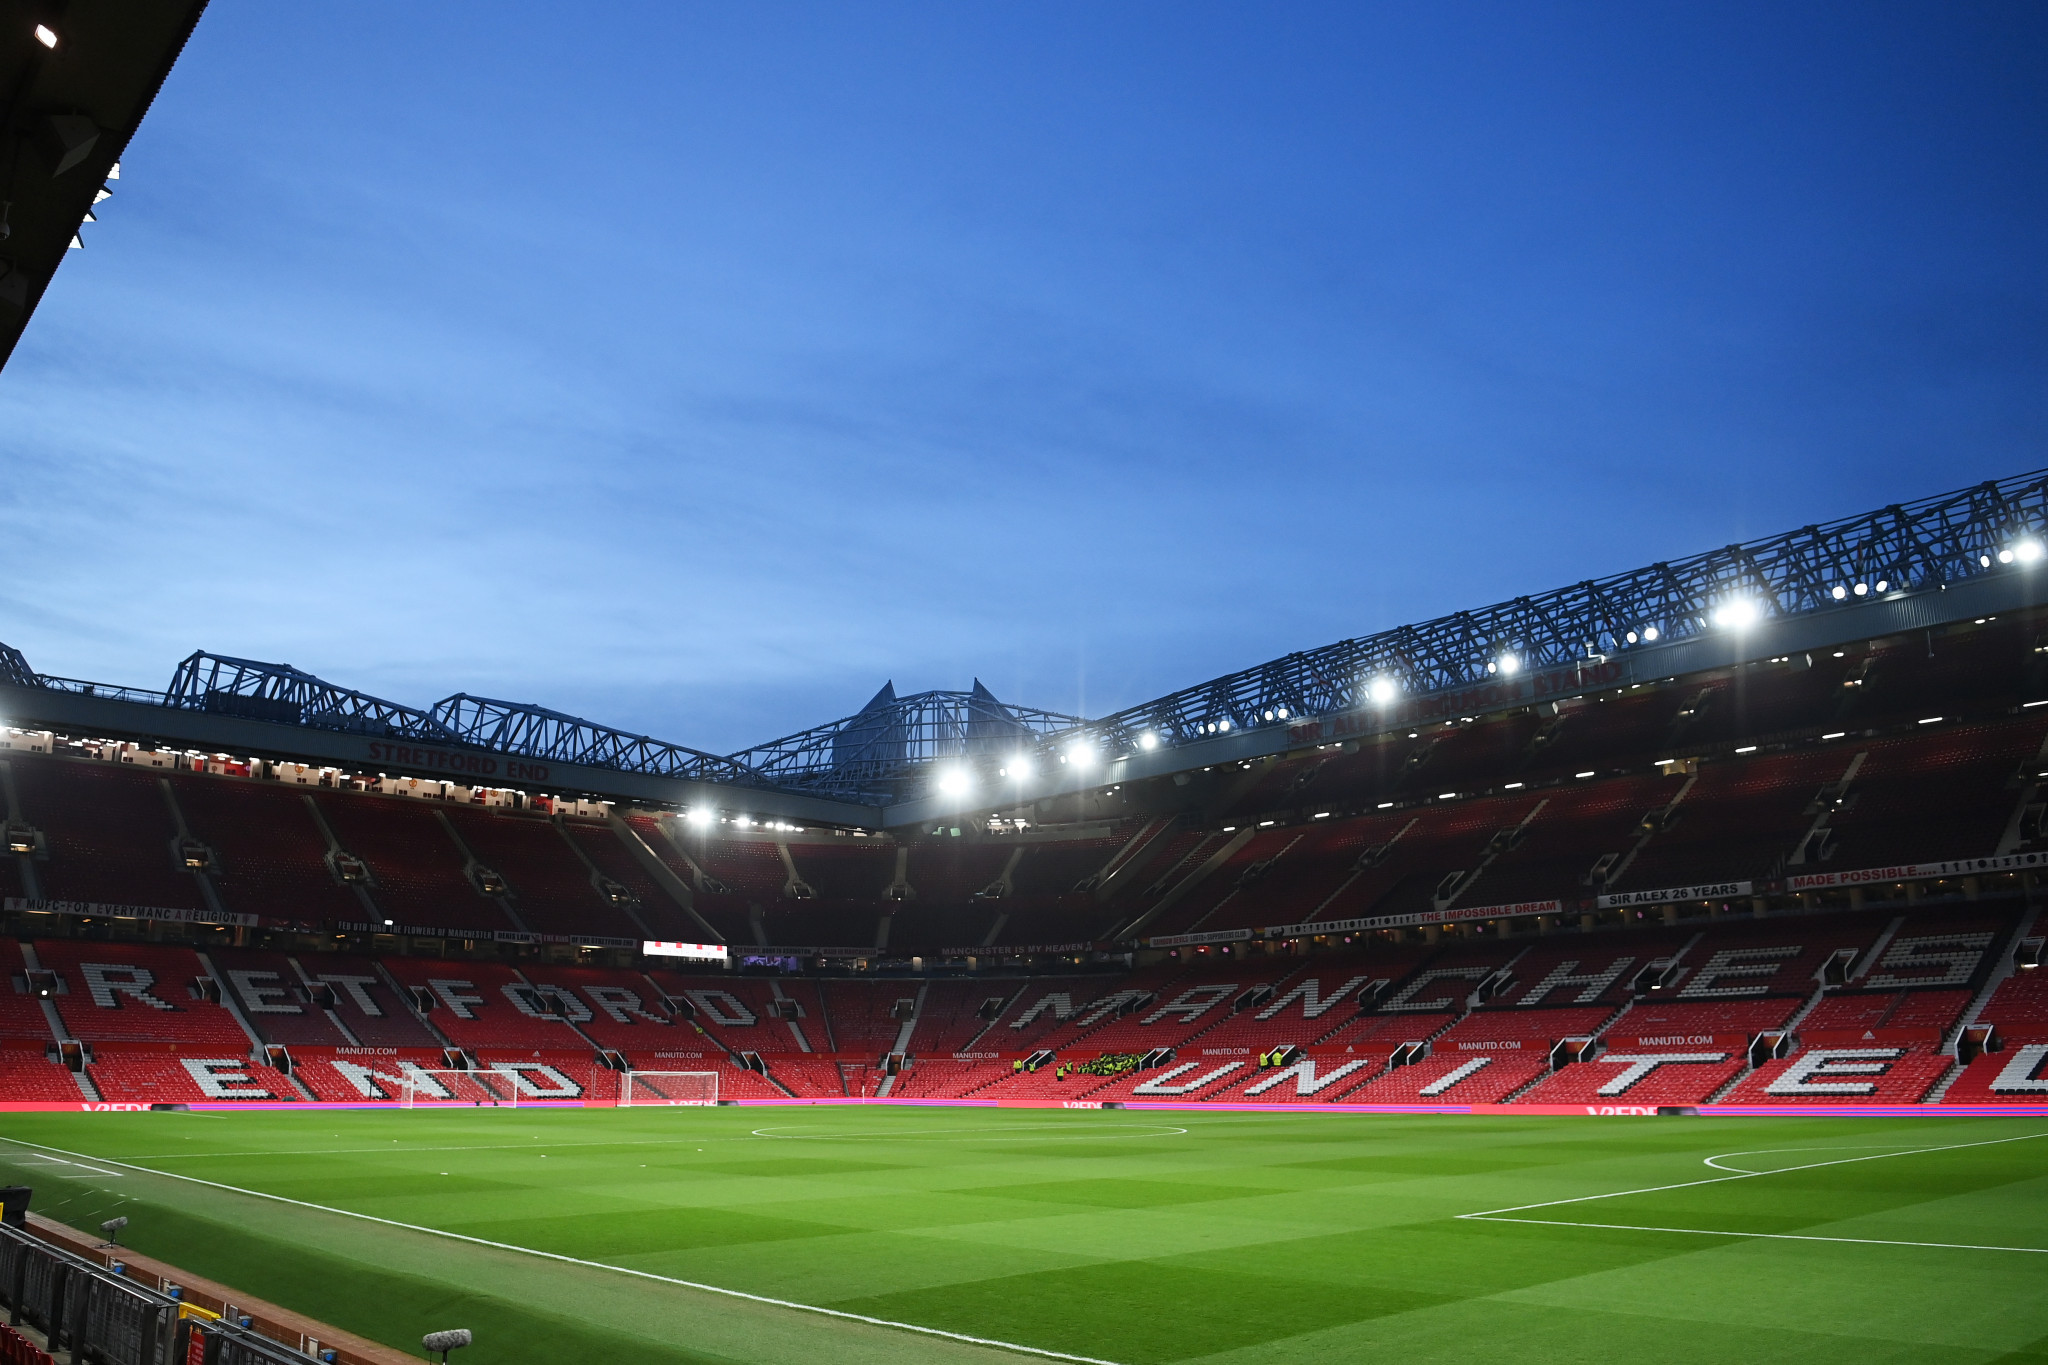 Sheikh Jassim bin Hamad al-Thani is said to be a lifelong fan of English giants Manchester United, and is seeking to take over the club from the unpopular Glazer family ©Getty Images